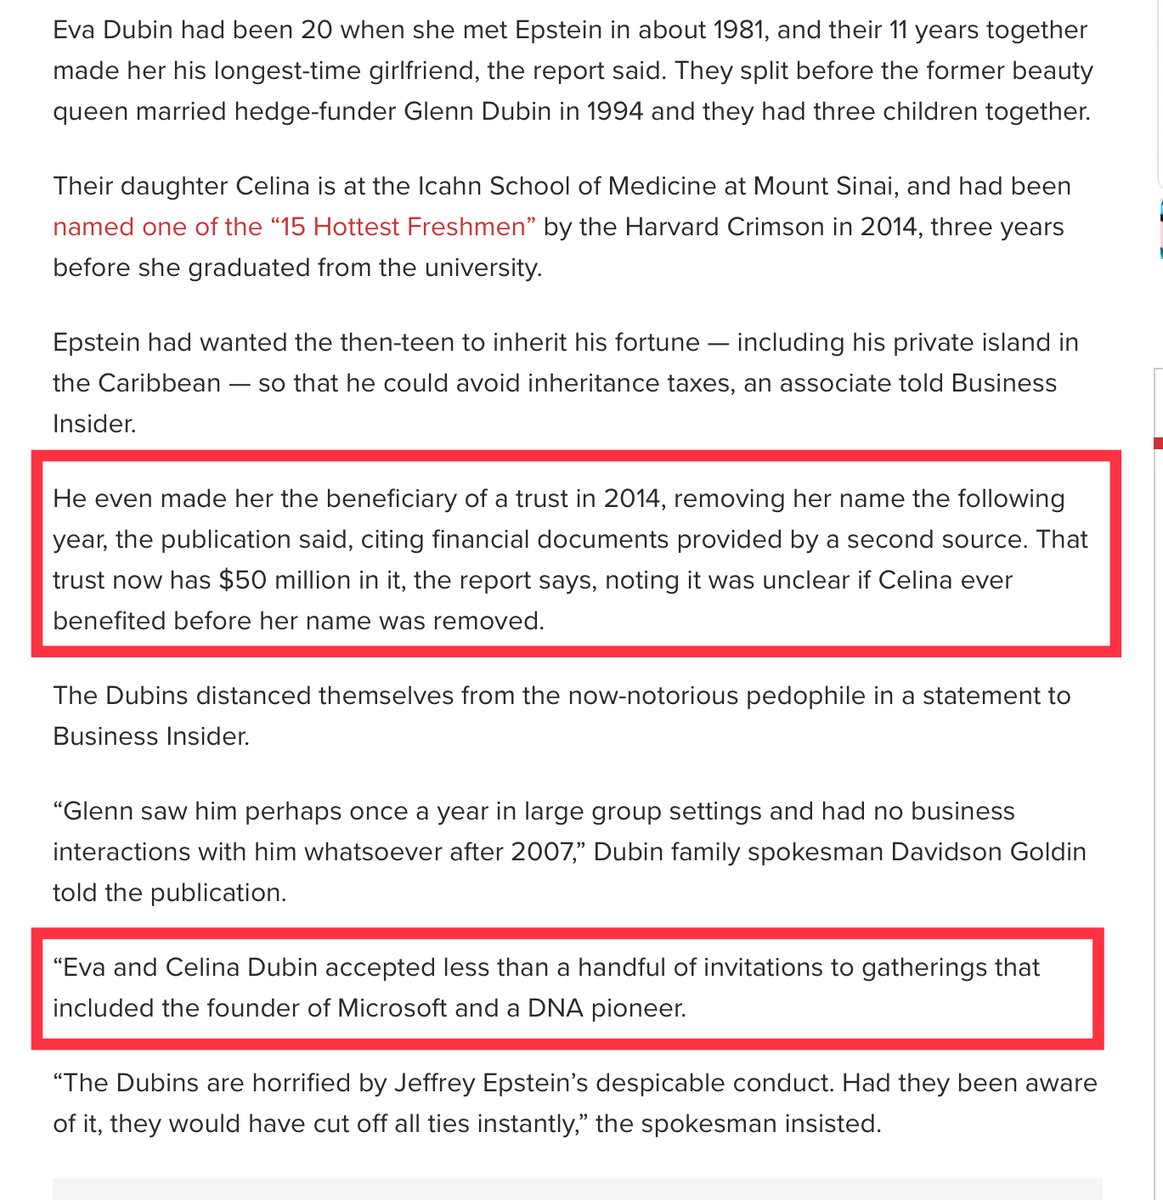 It appears Epstein wanted to marry her daughter and at one point made her the beneficiary to his Trust. And now we have a connection to ‘DNA pioneer’? Microsoft founder. You seriously cannot make up these connections. It’s all the usual disgusting... https://nypost.com/2019/12/18/jeffrey-epstein-wanted-to-marry-ex-girlfriends-teenage-daughter-who-called-him-uncle-jeff/